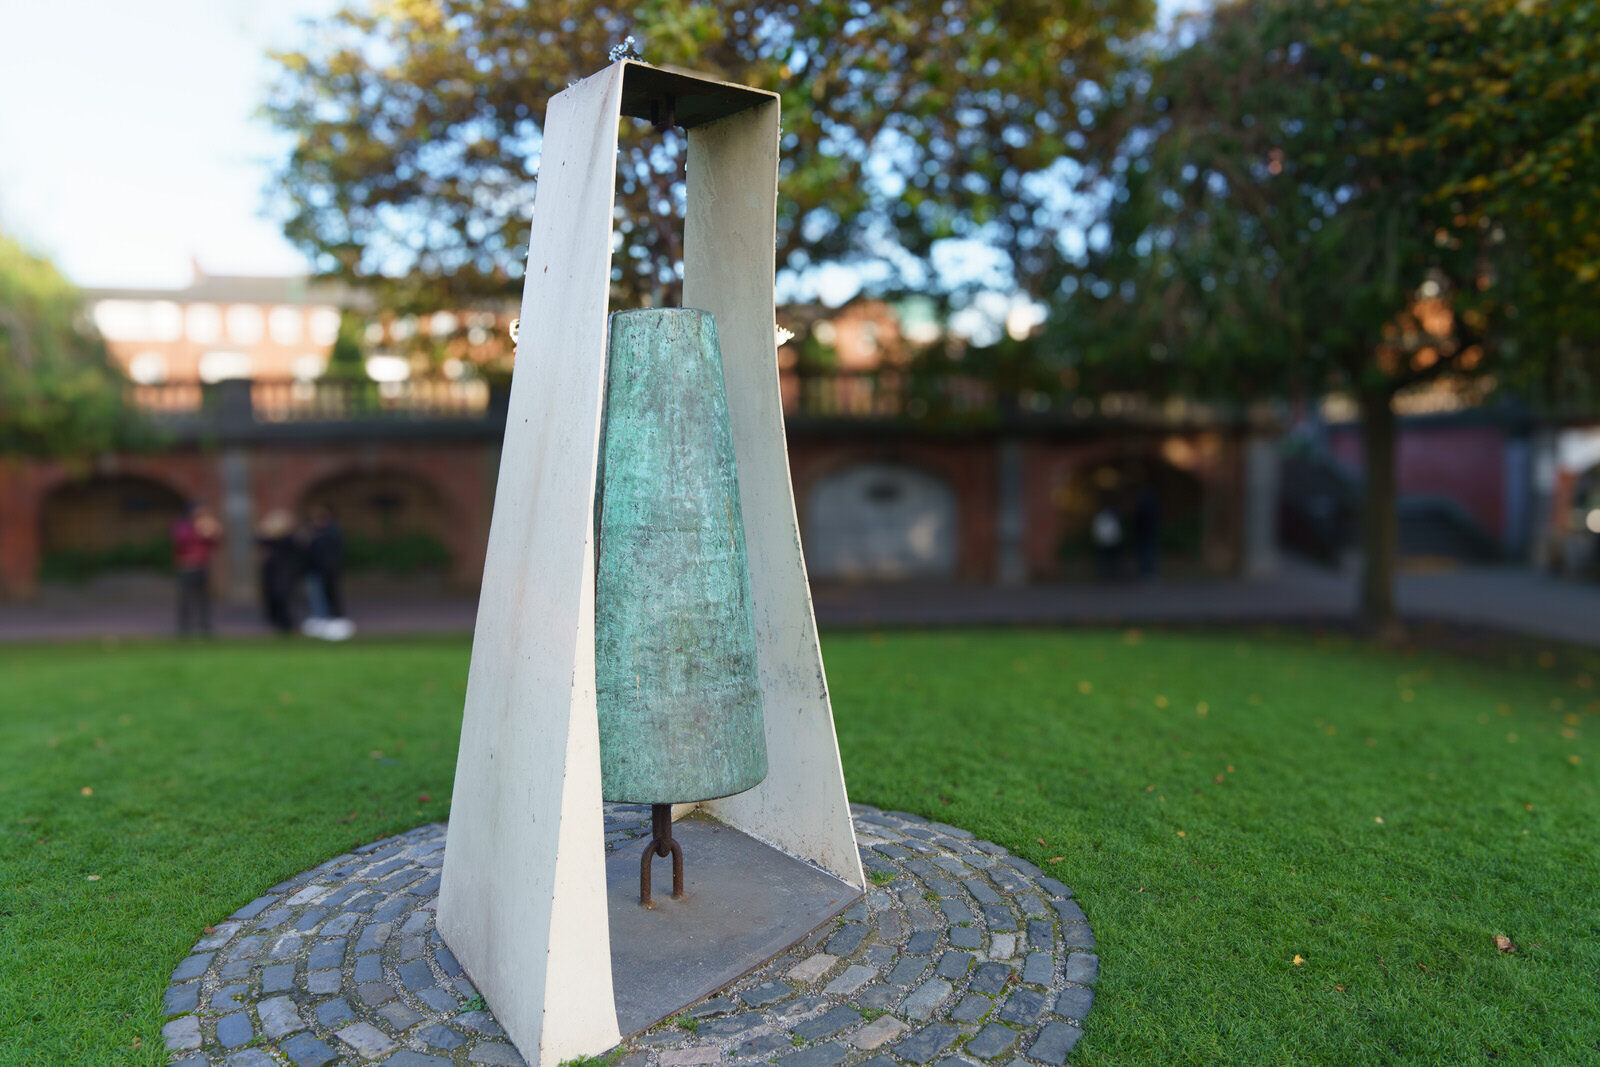 THE LIBERTY BELL BESIDE ST PATRICK'S CATHEDRAL [THE ARTIST IS VIVIENNE ROCHE]-224749-1